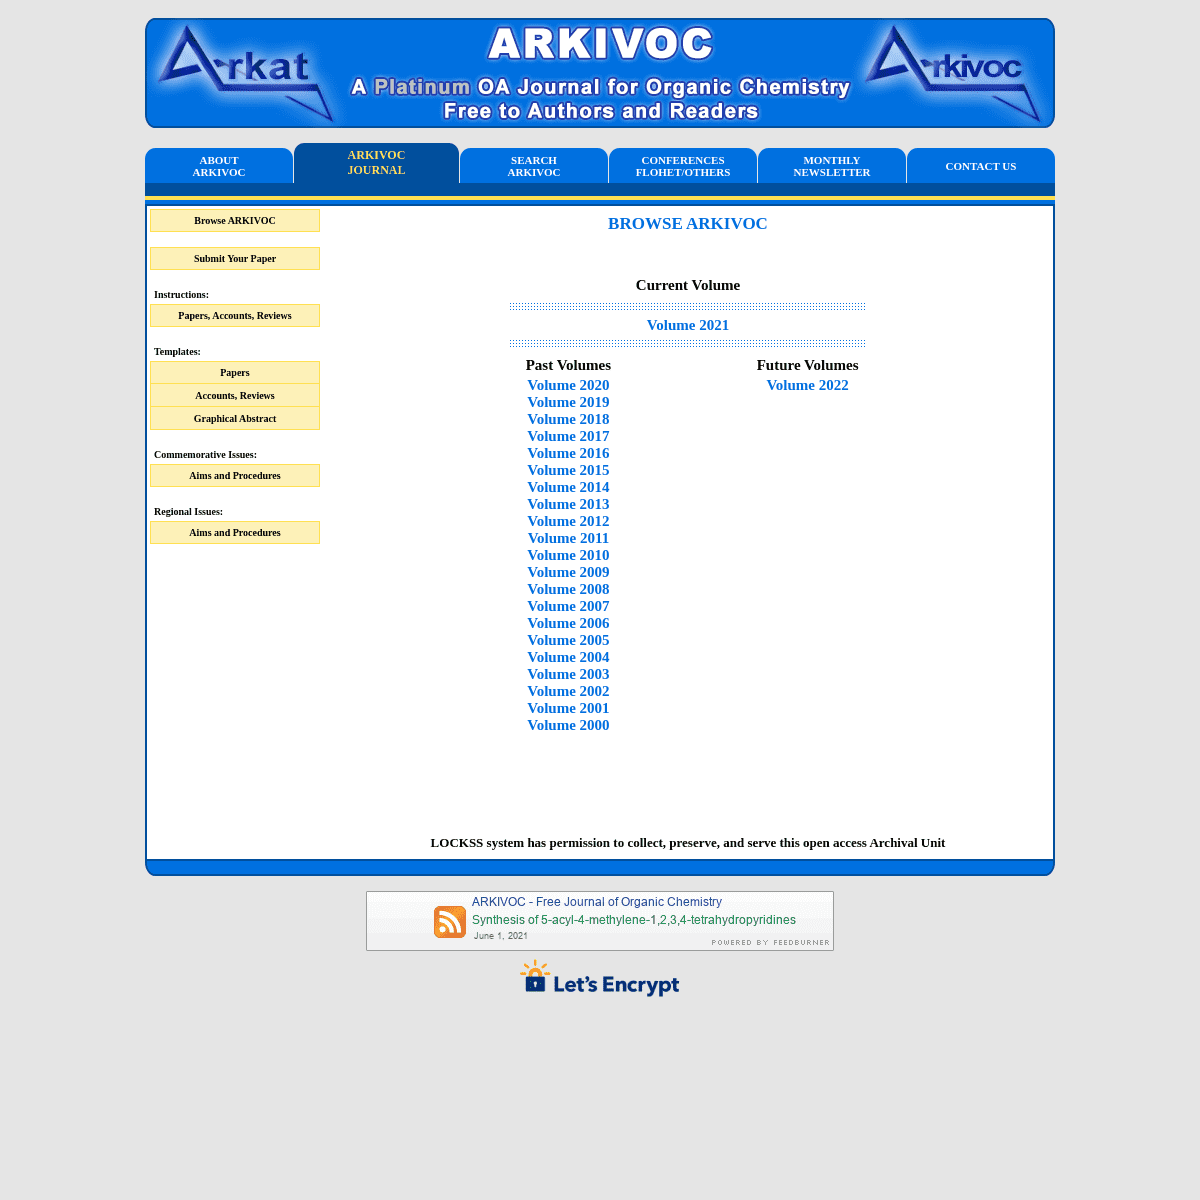 A complete backup of https://arkat-usa.org